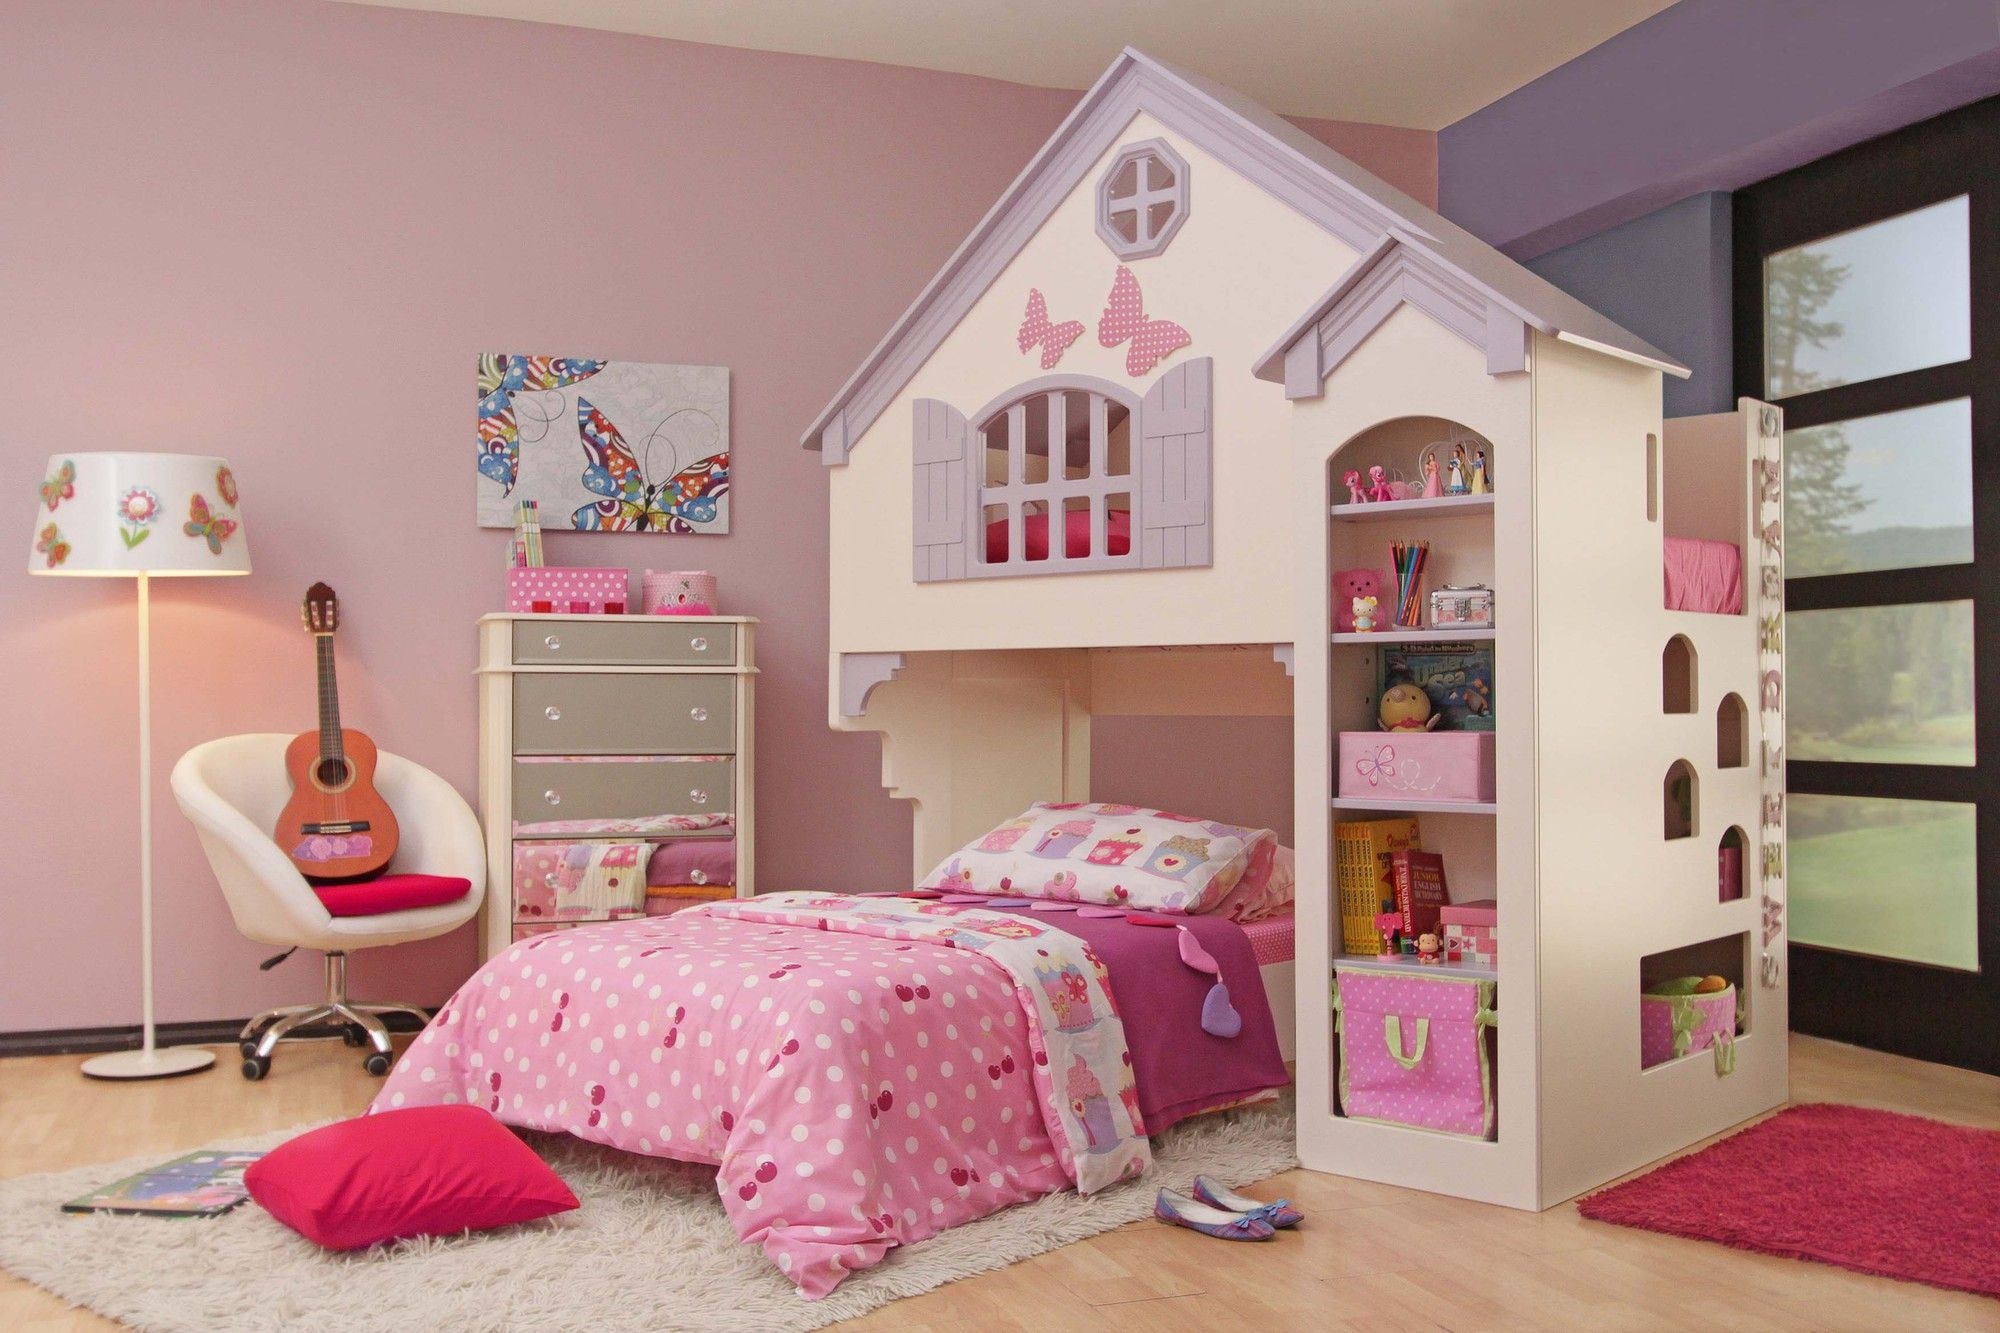 Doll house bed